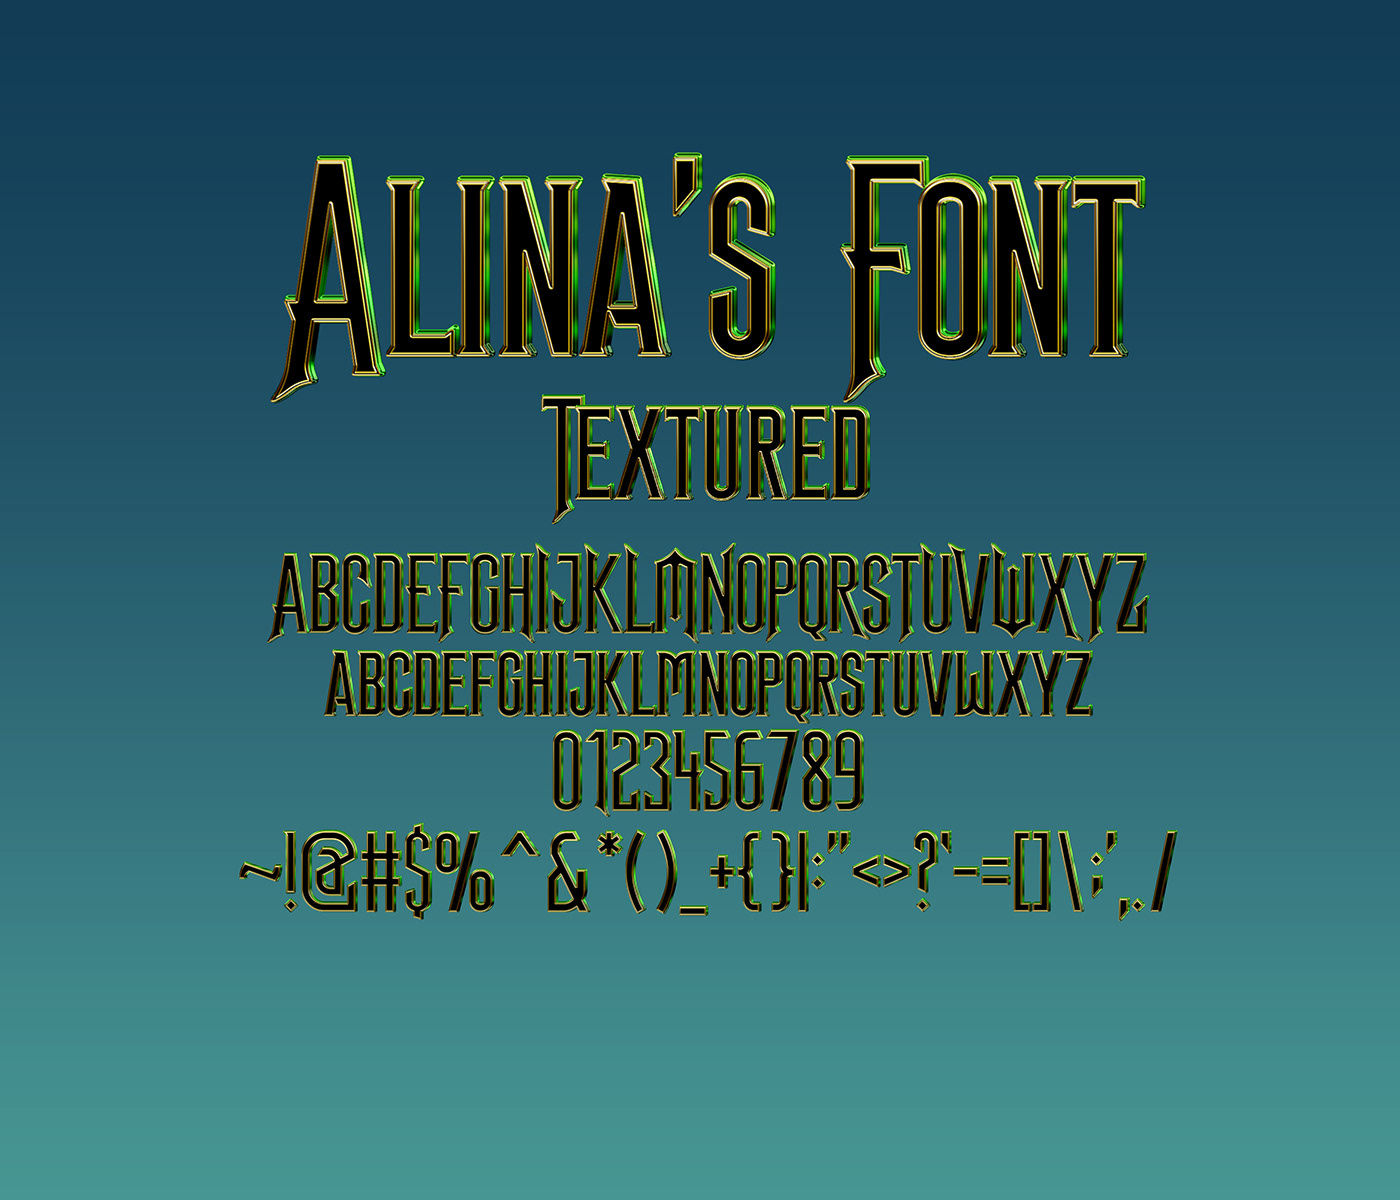 wicked witch Magic   fantasy wicked witch wizard of oz dorothy OZ alinasfont textured font